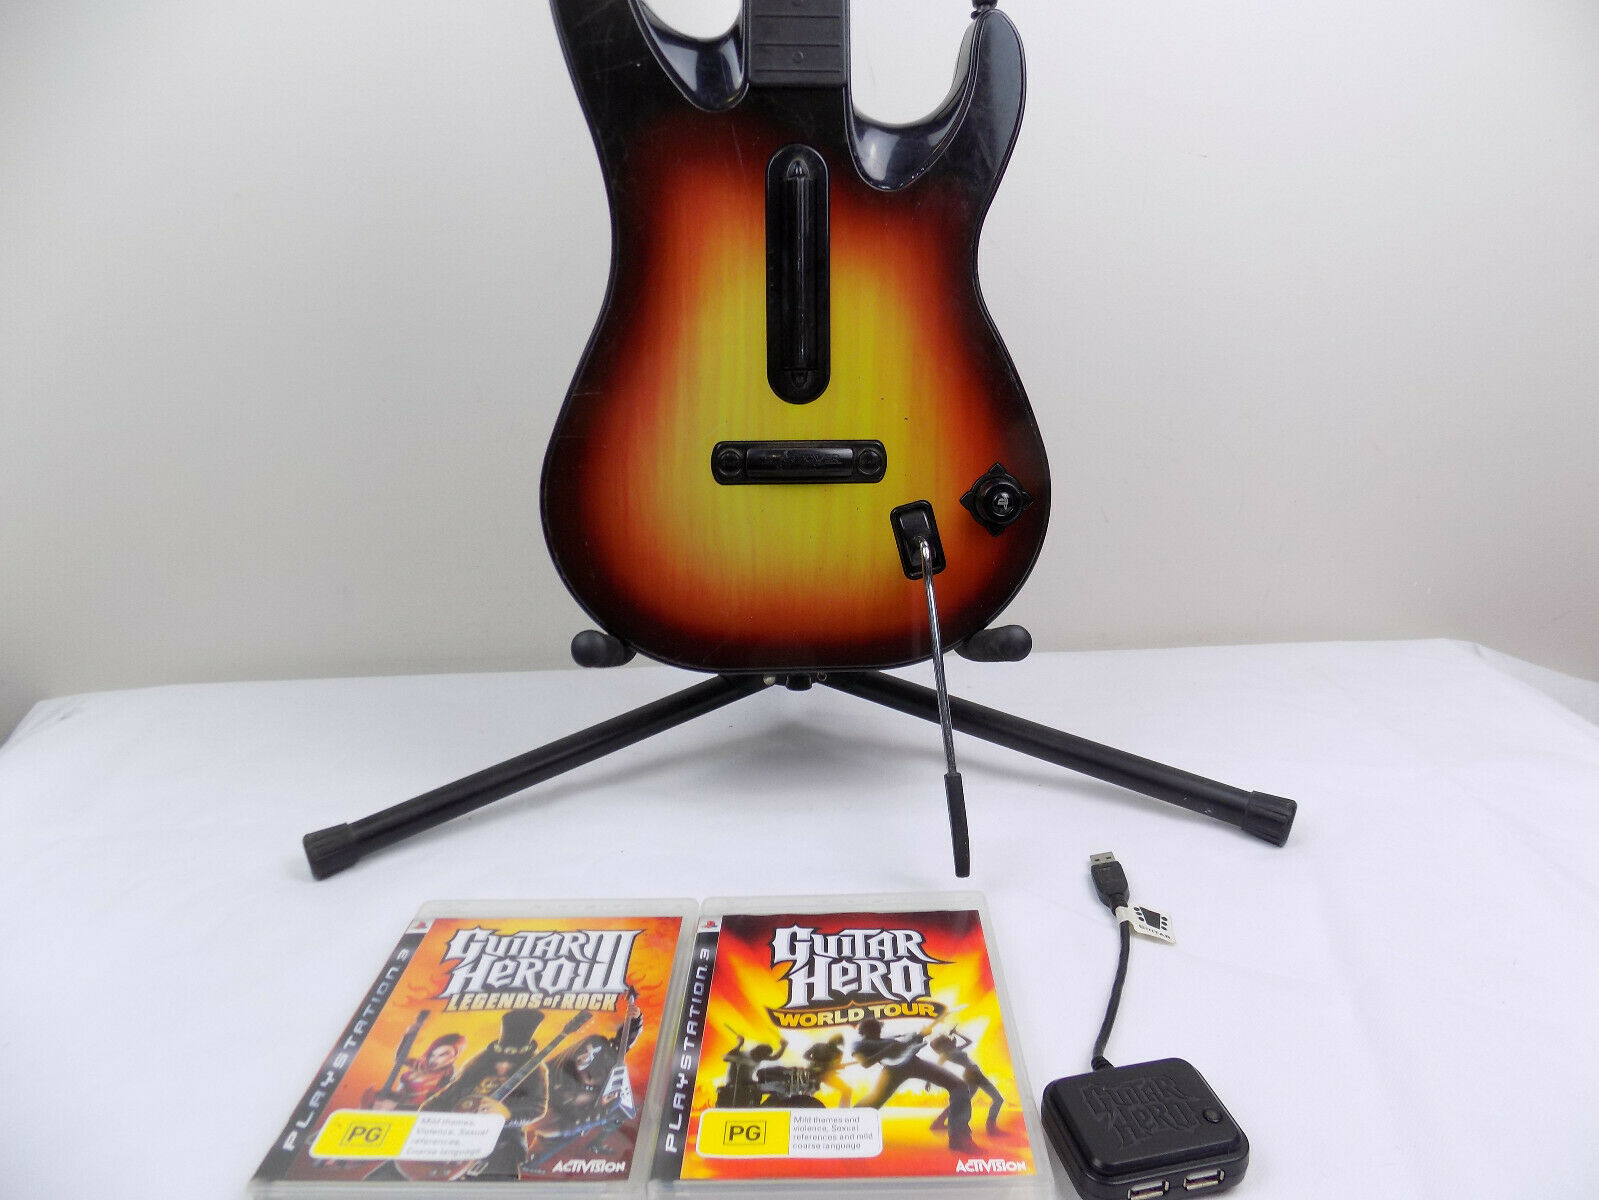 ps2 guitar hero dongle compatibility